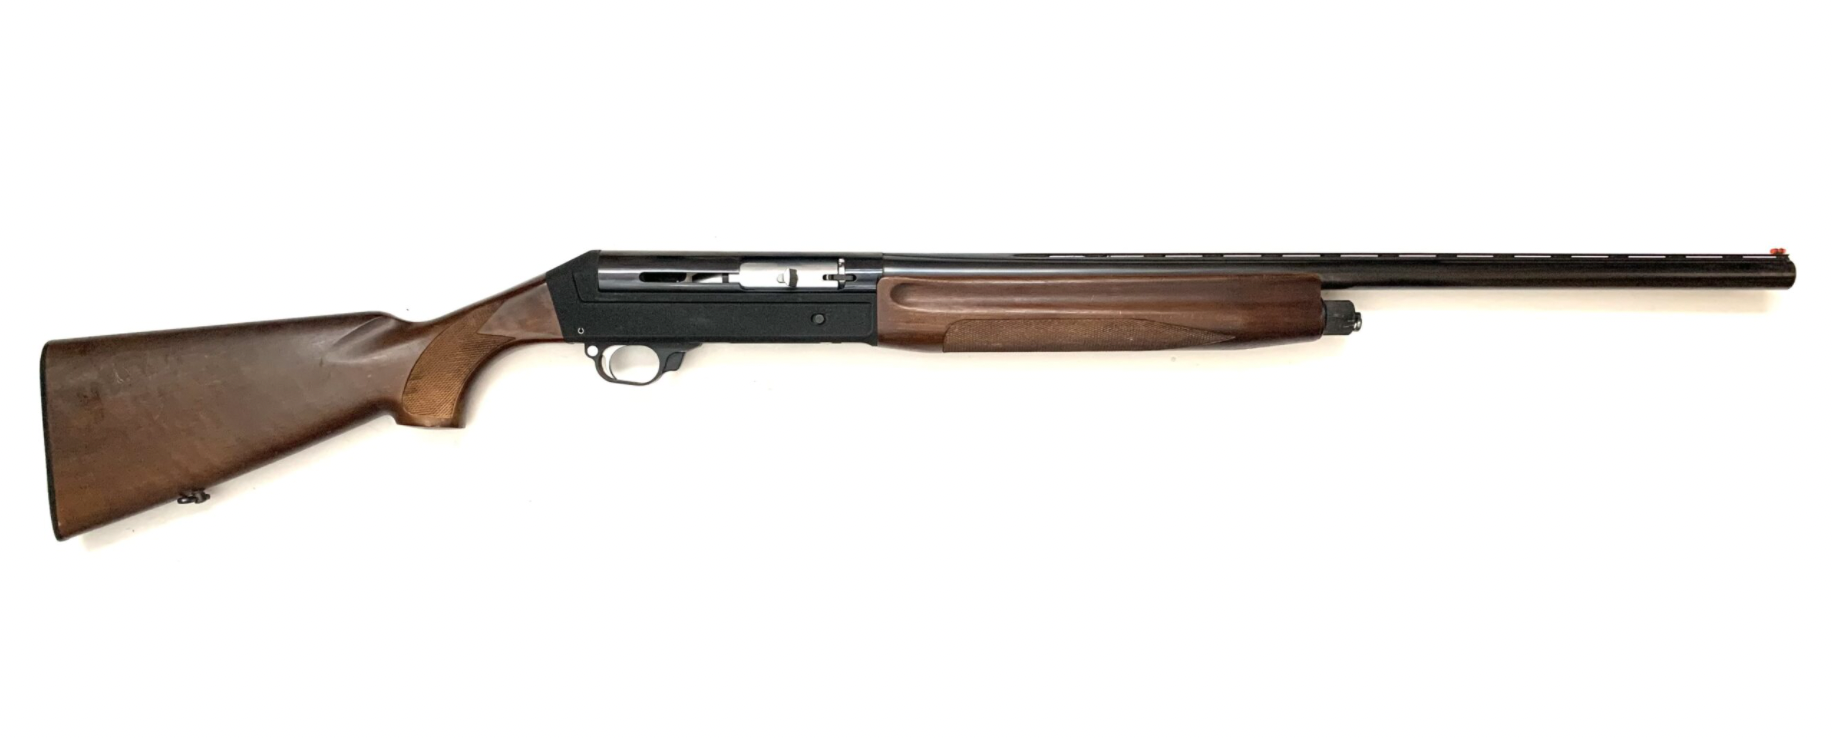 the first Benelli in the US